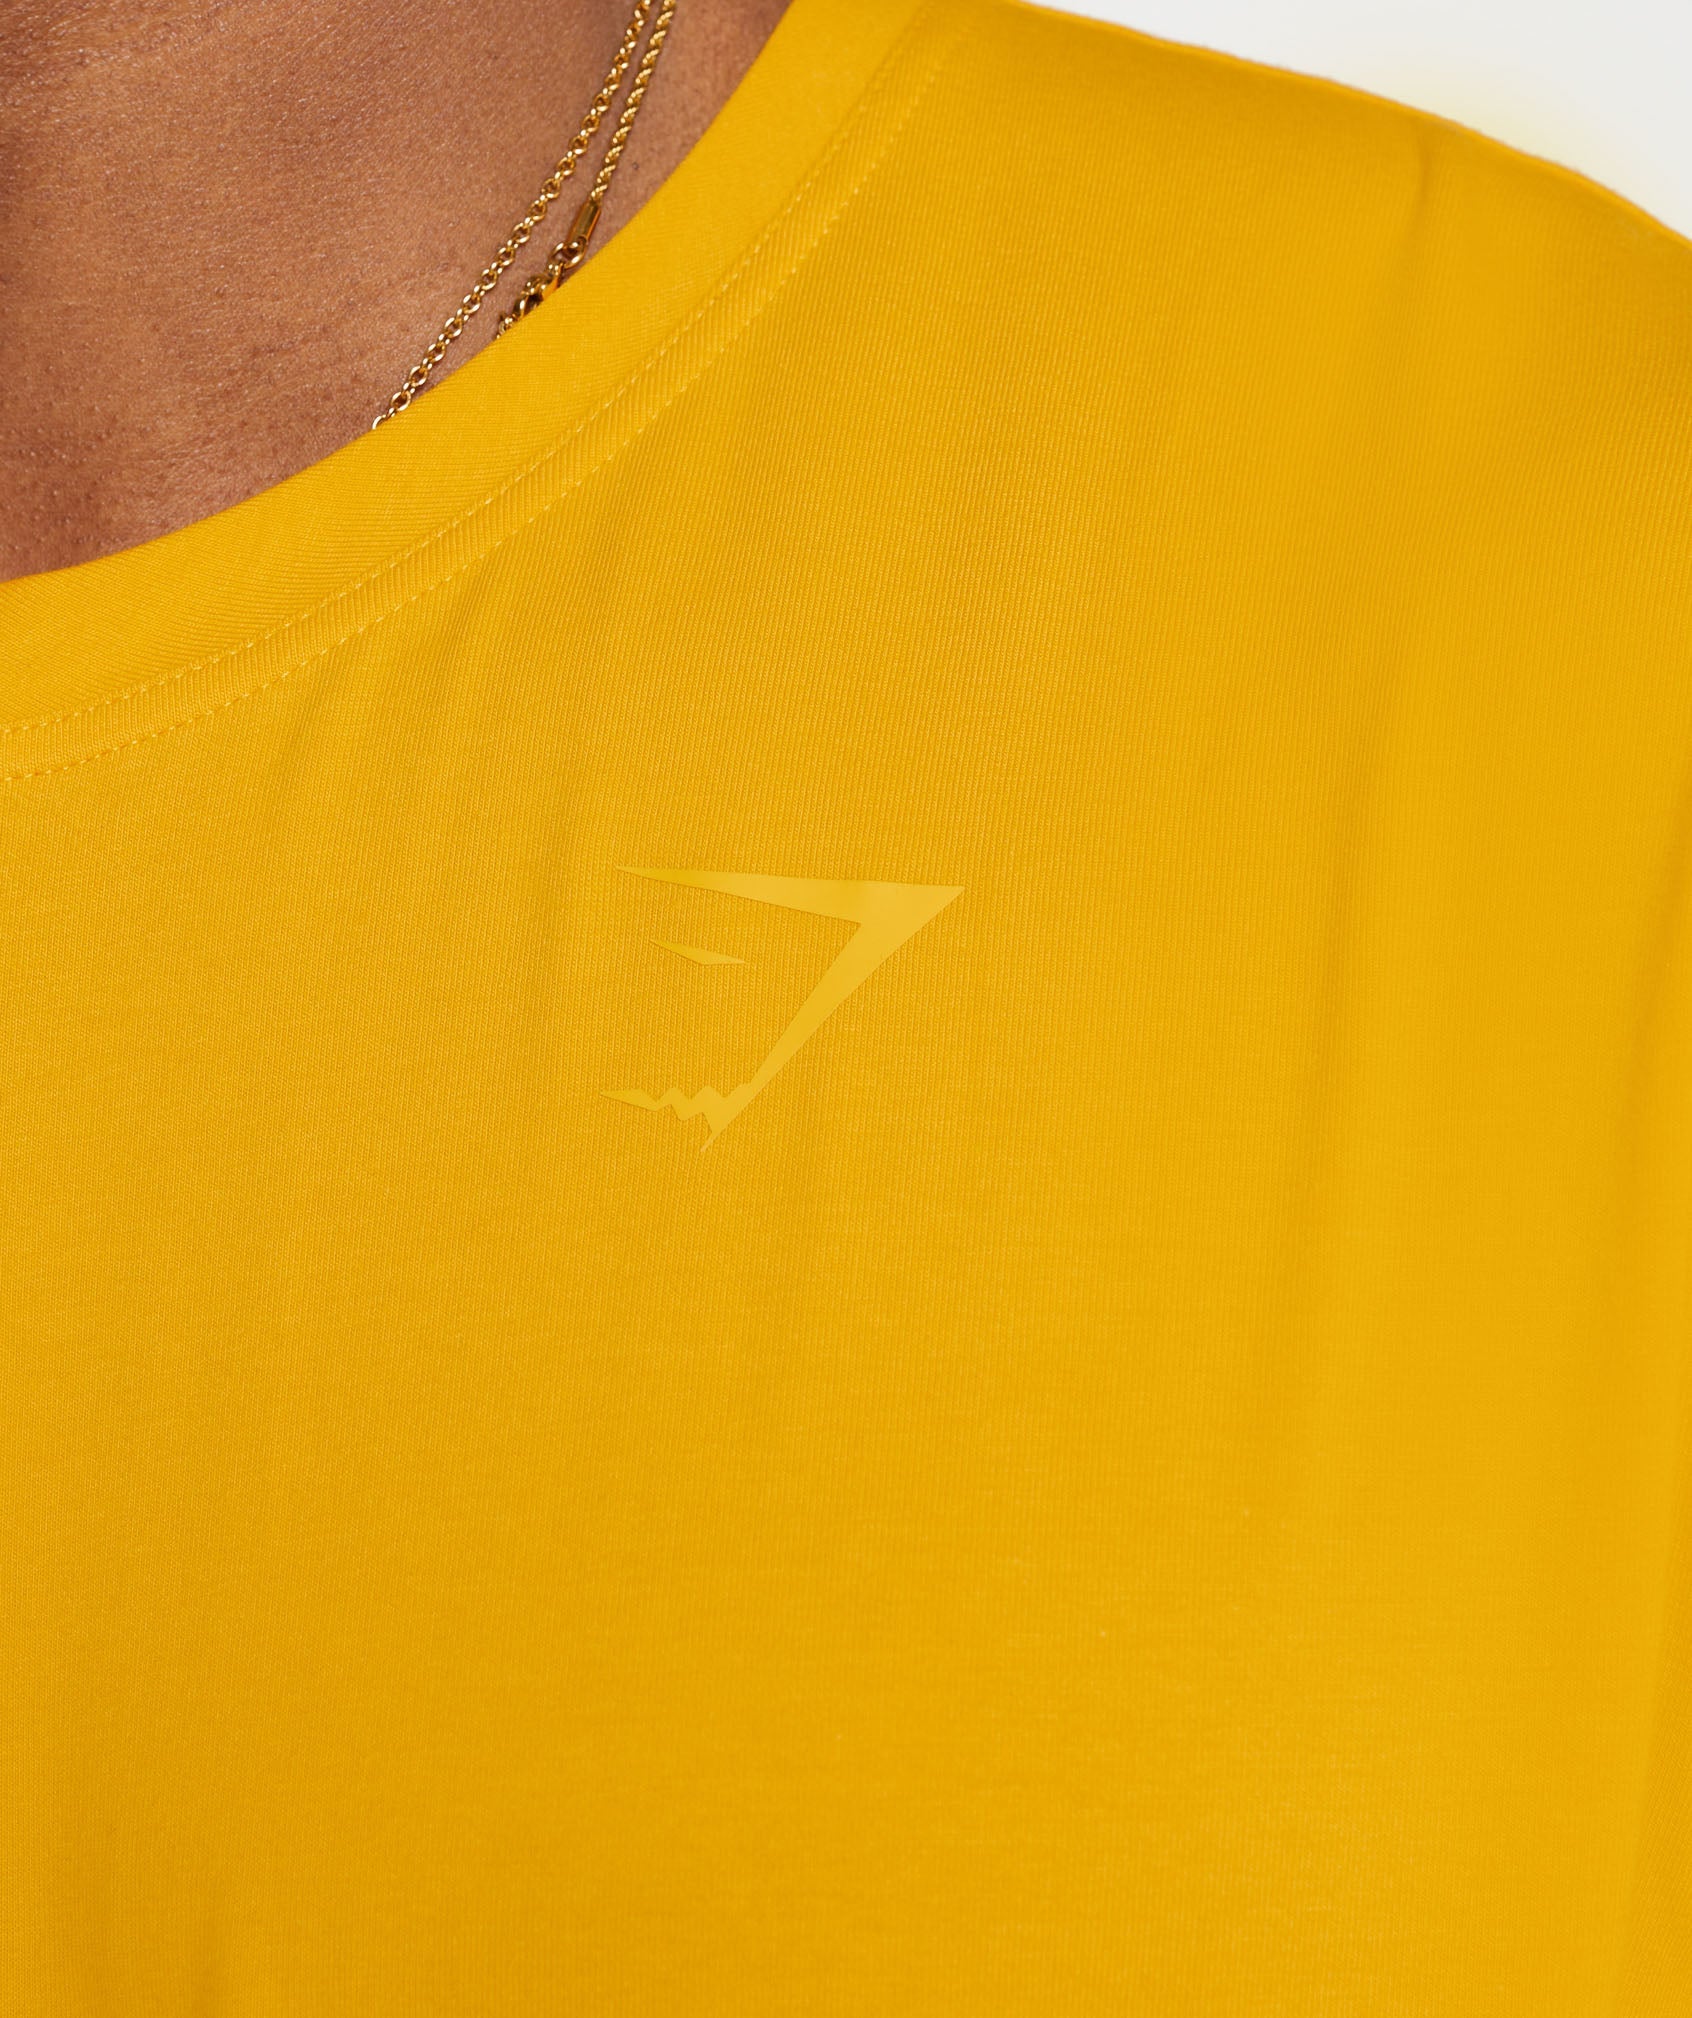 Power T-Shirt in Sunny Yellow - view 7